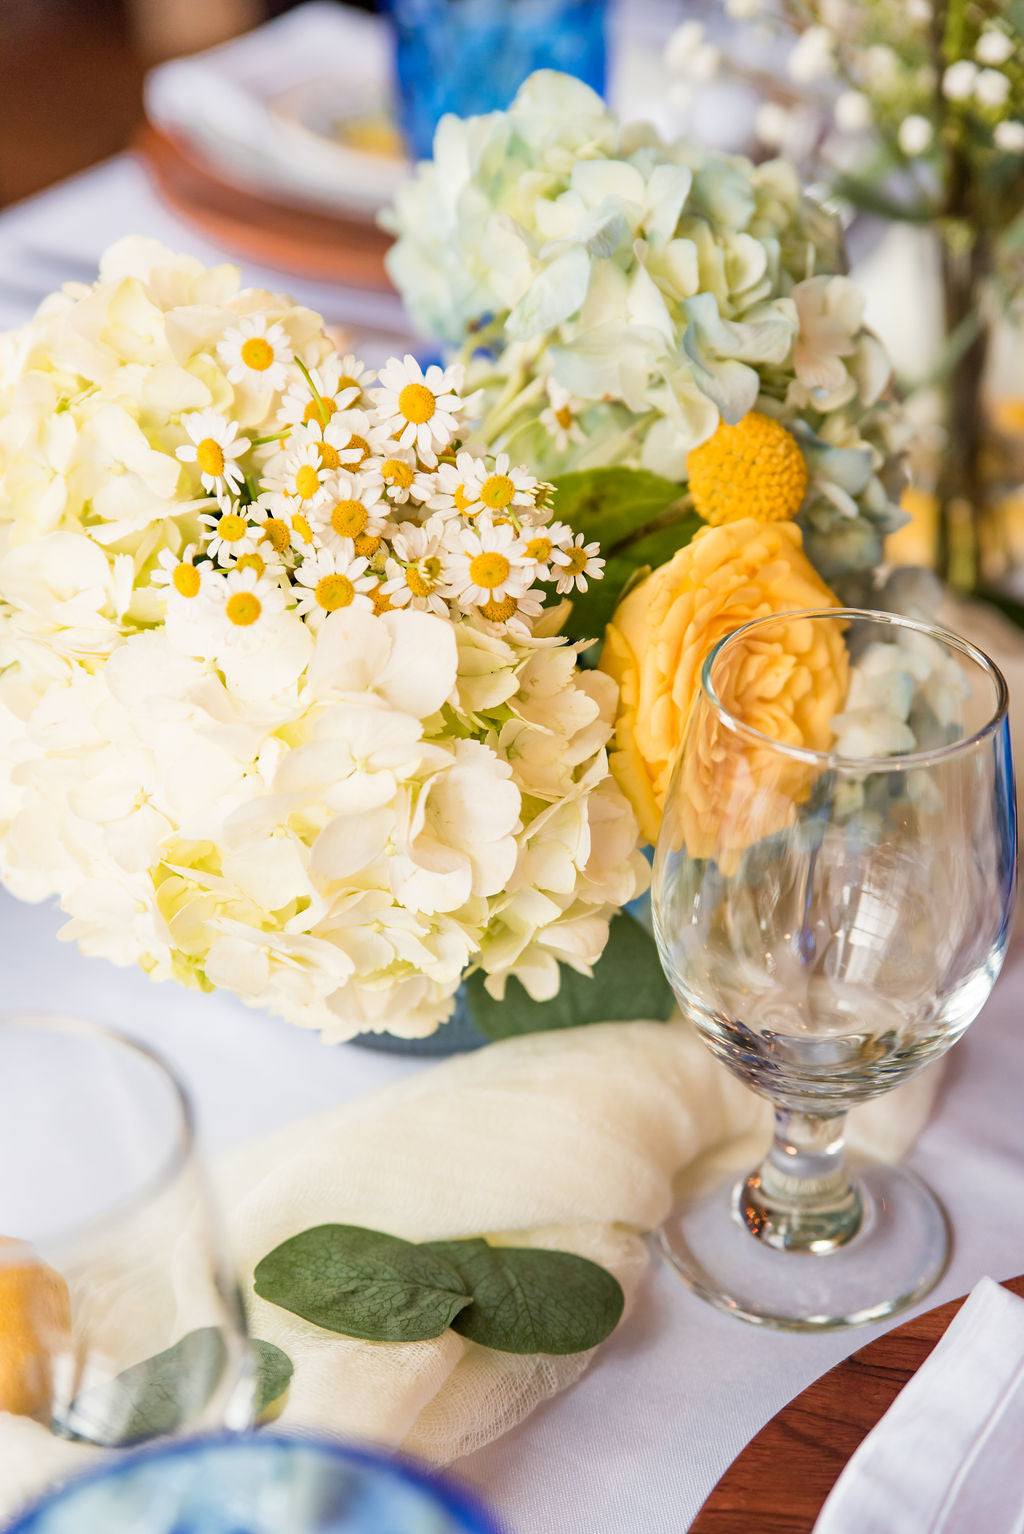 Small Floral Centerpiece Rental